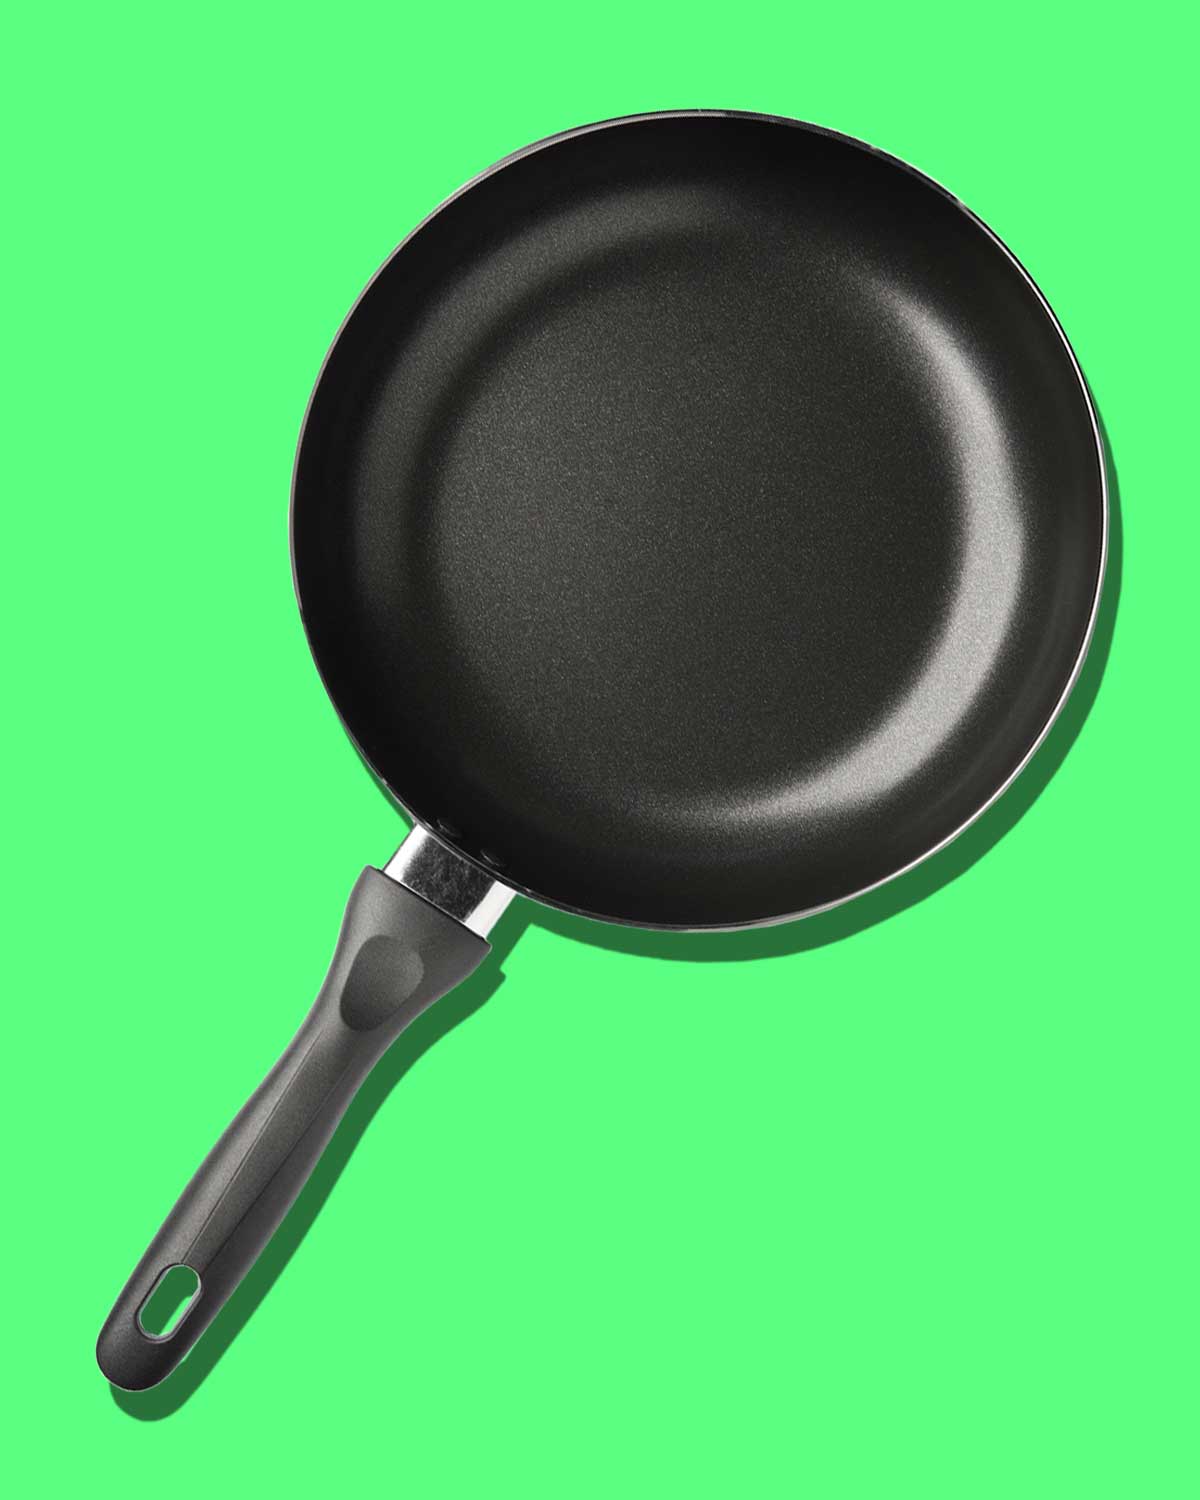 A nonstick skillet in response to the question 'is it safe to cook in a nonstick skillet?' on a green background